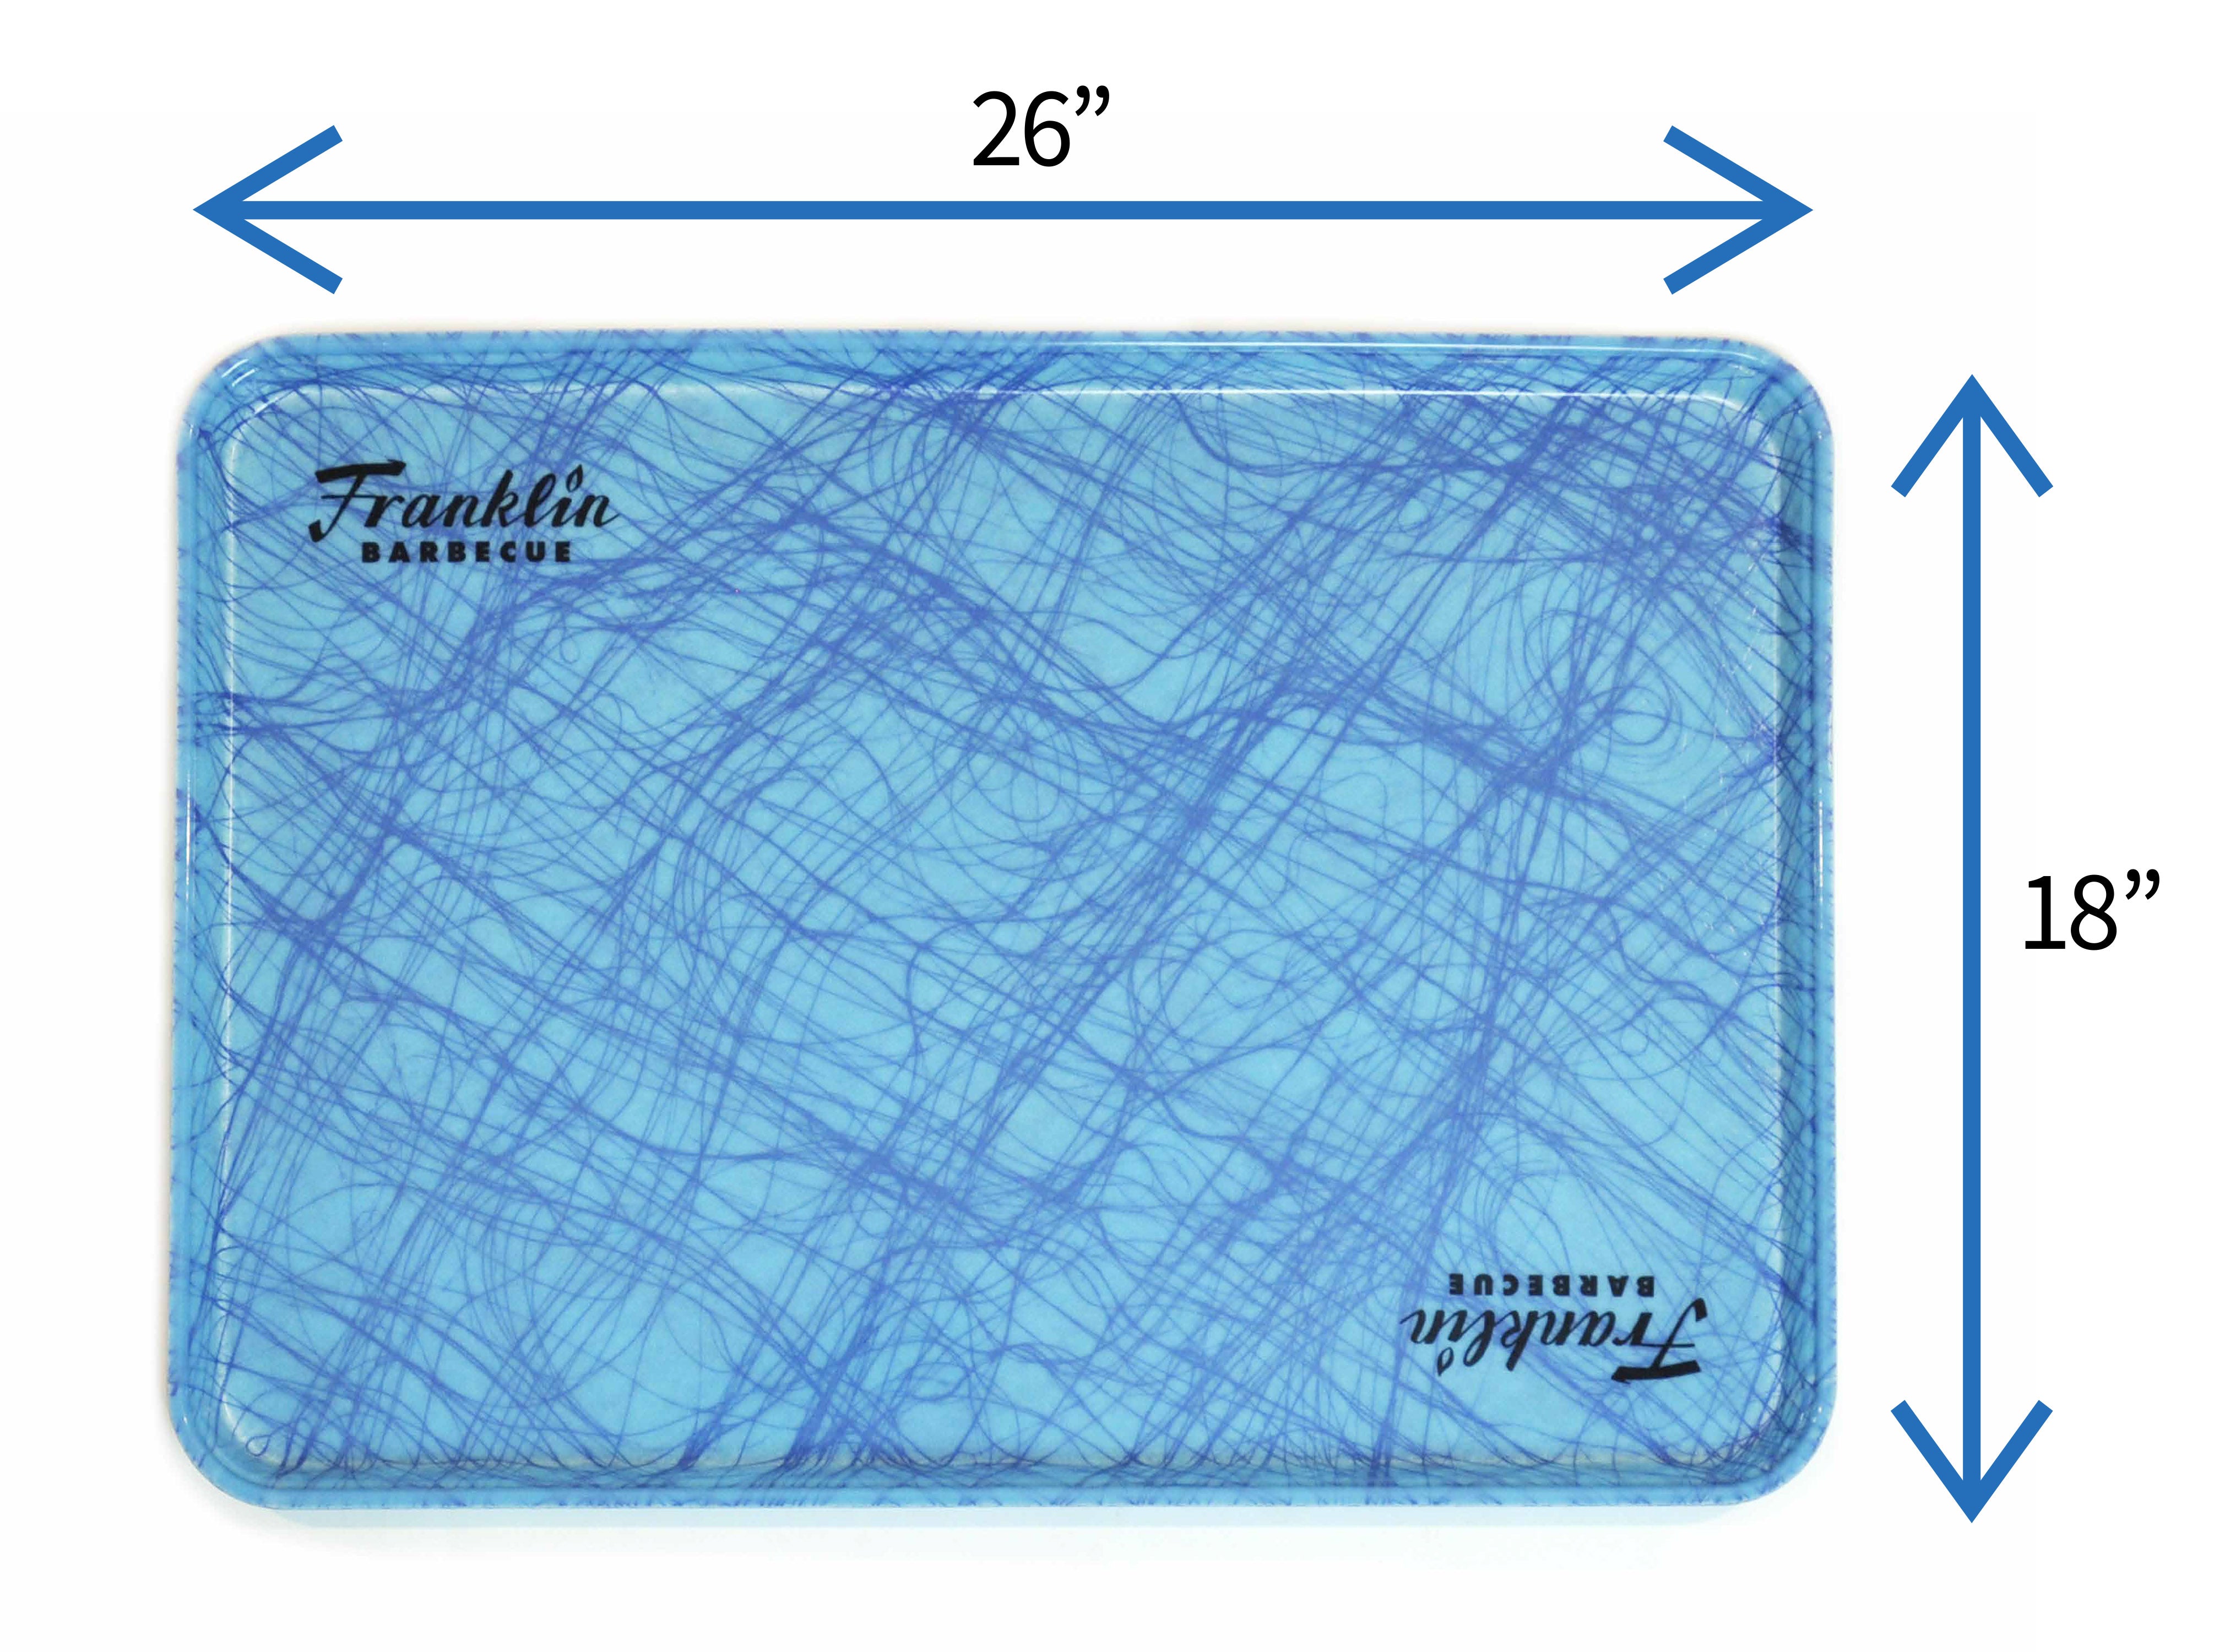 Extra Large serving tray in Swirl Blue. Dimensions are 18''x26''. Made from reinforced fiberglass. 